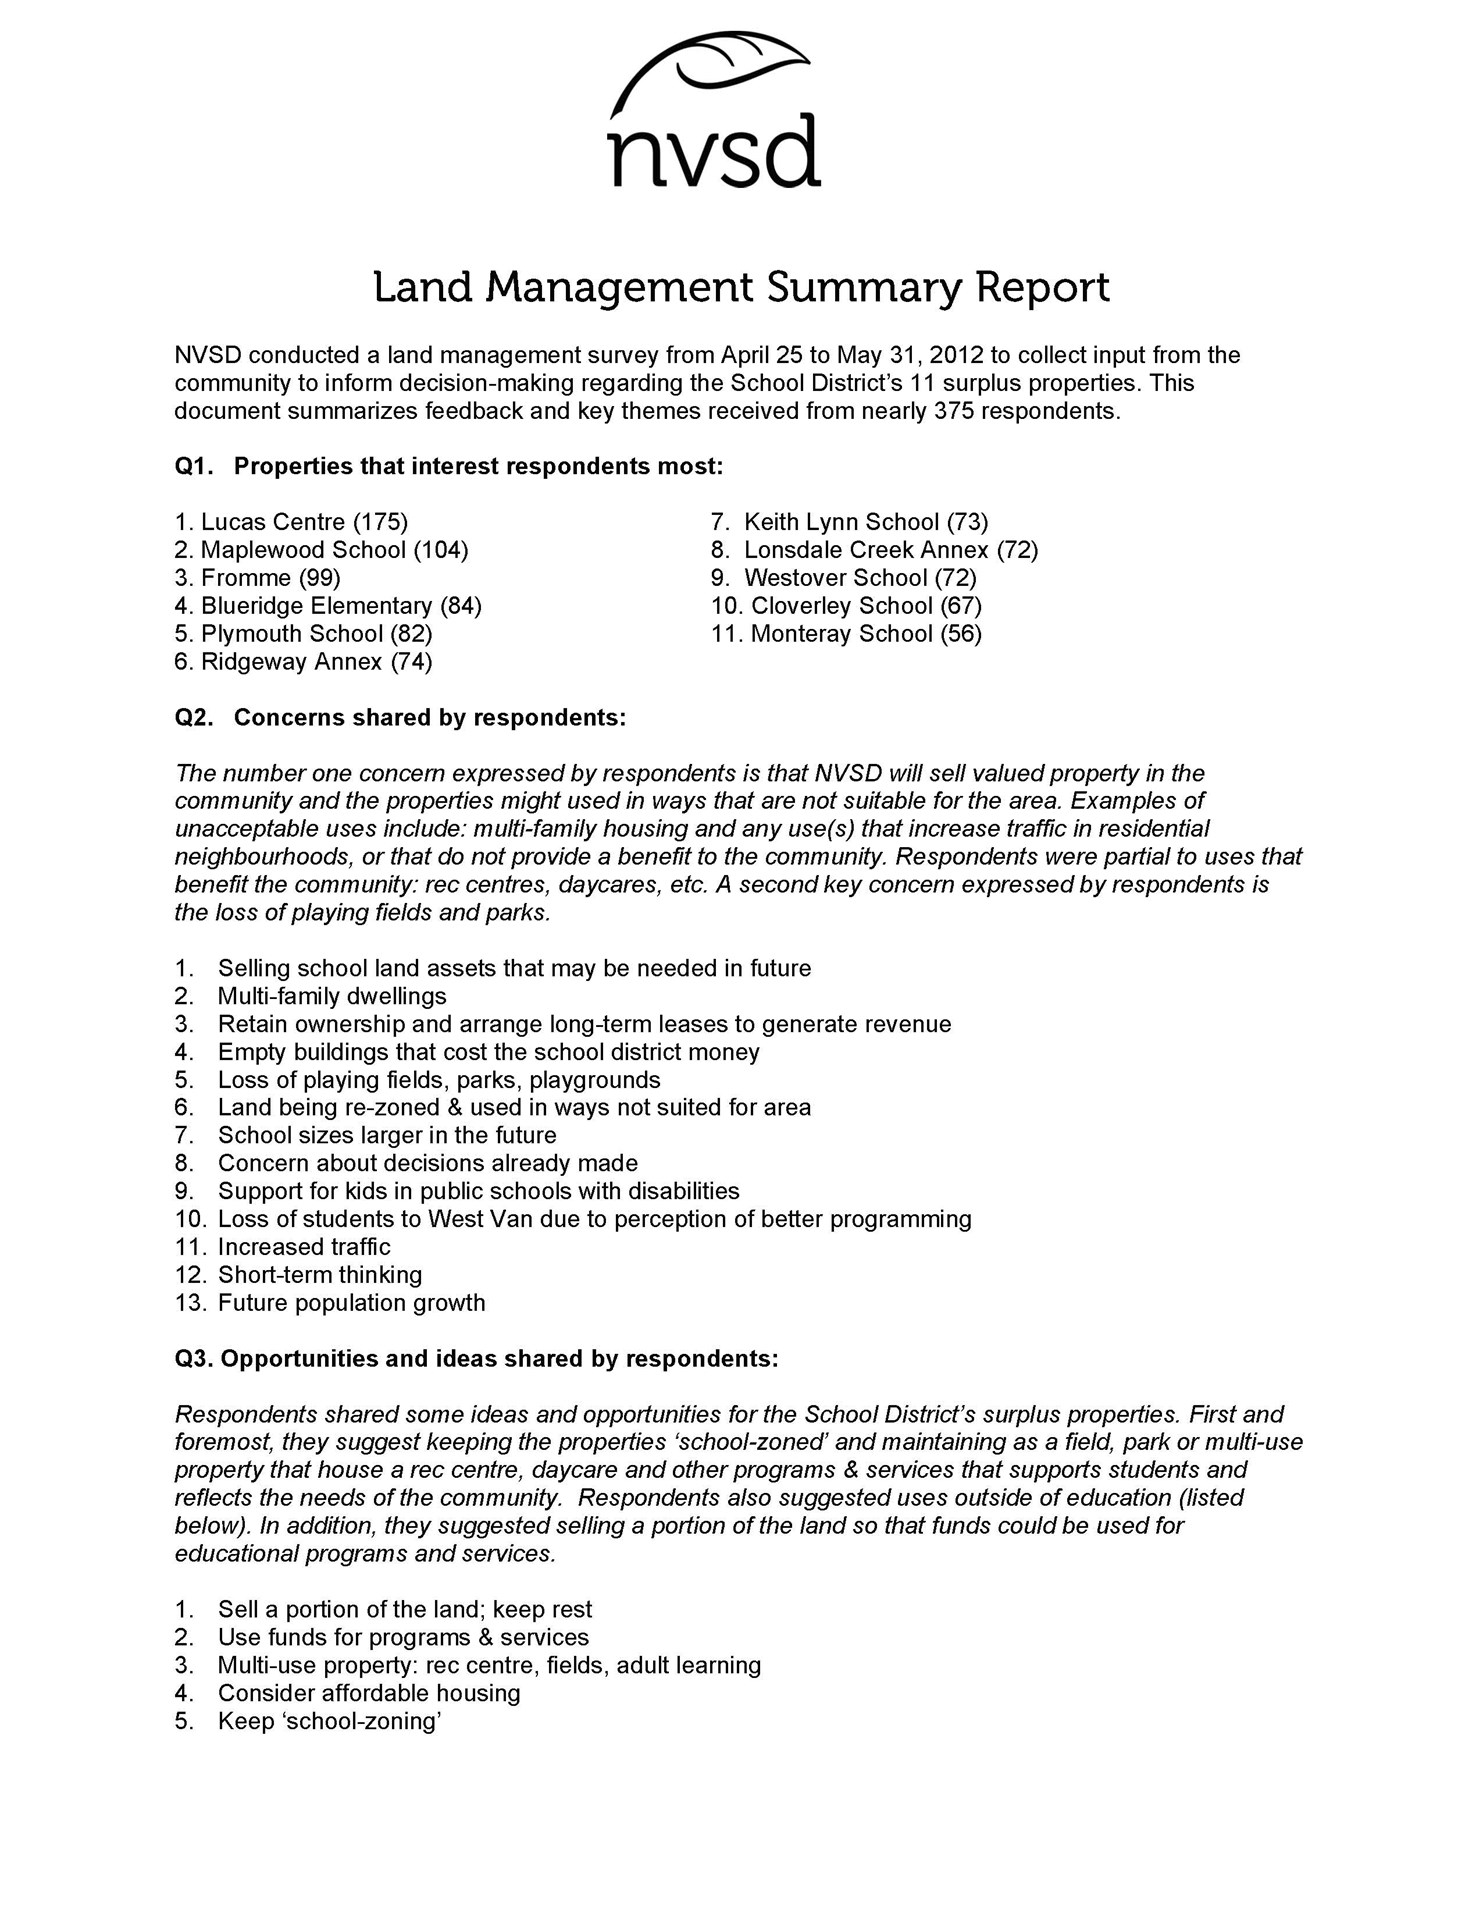 NVSD-Land-Management-Summary-Report-June-12-2012-1lpe9in_Page_1.jpg